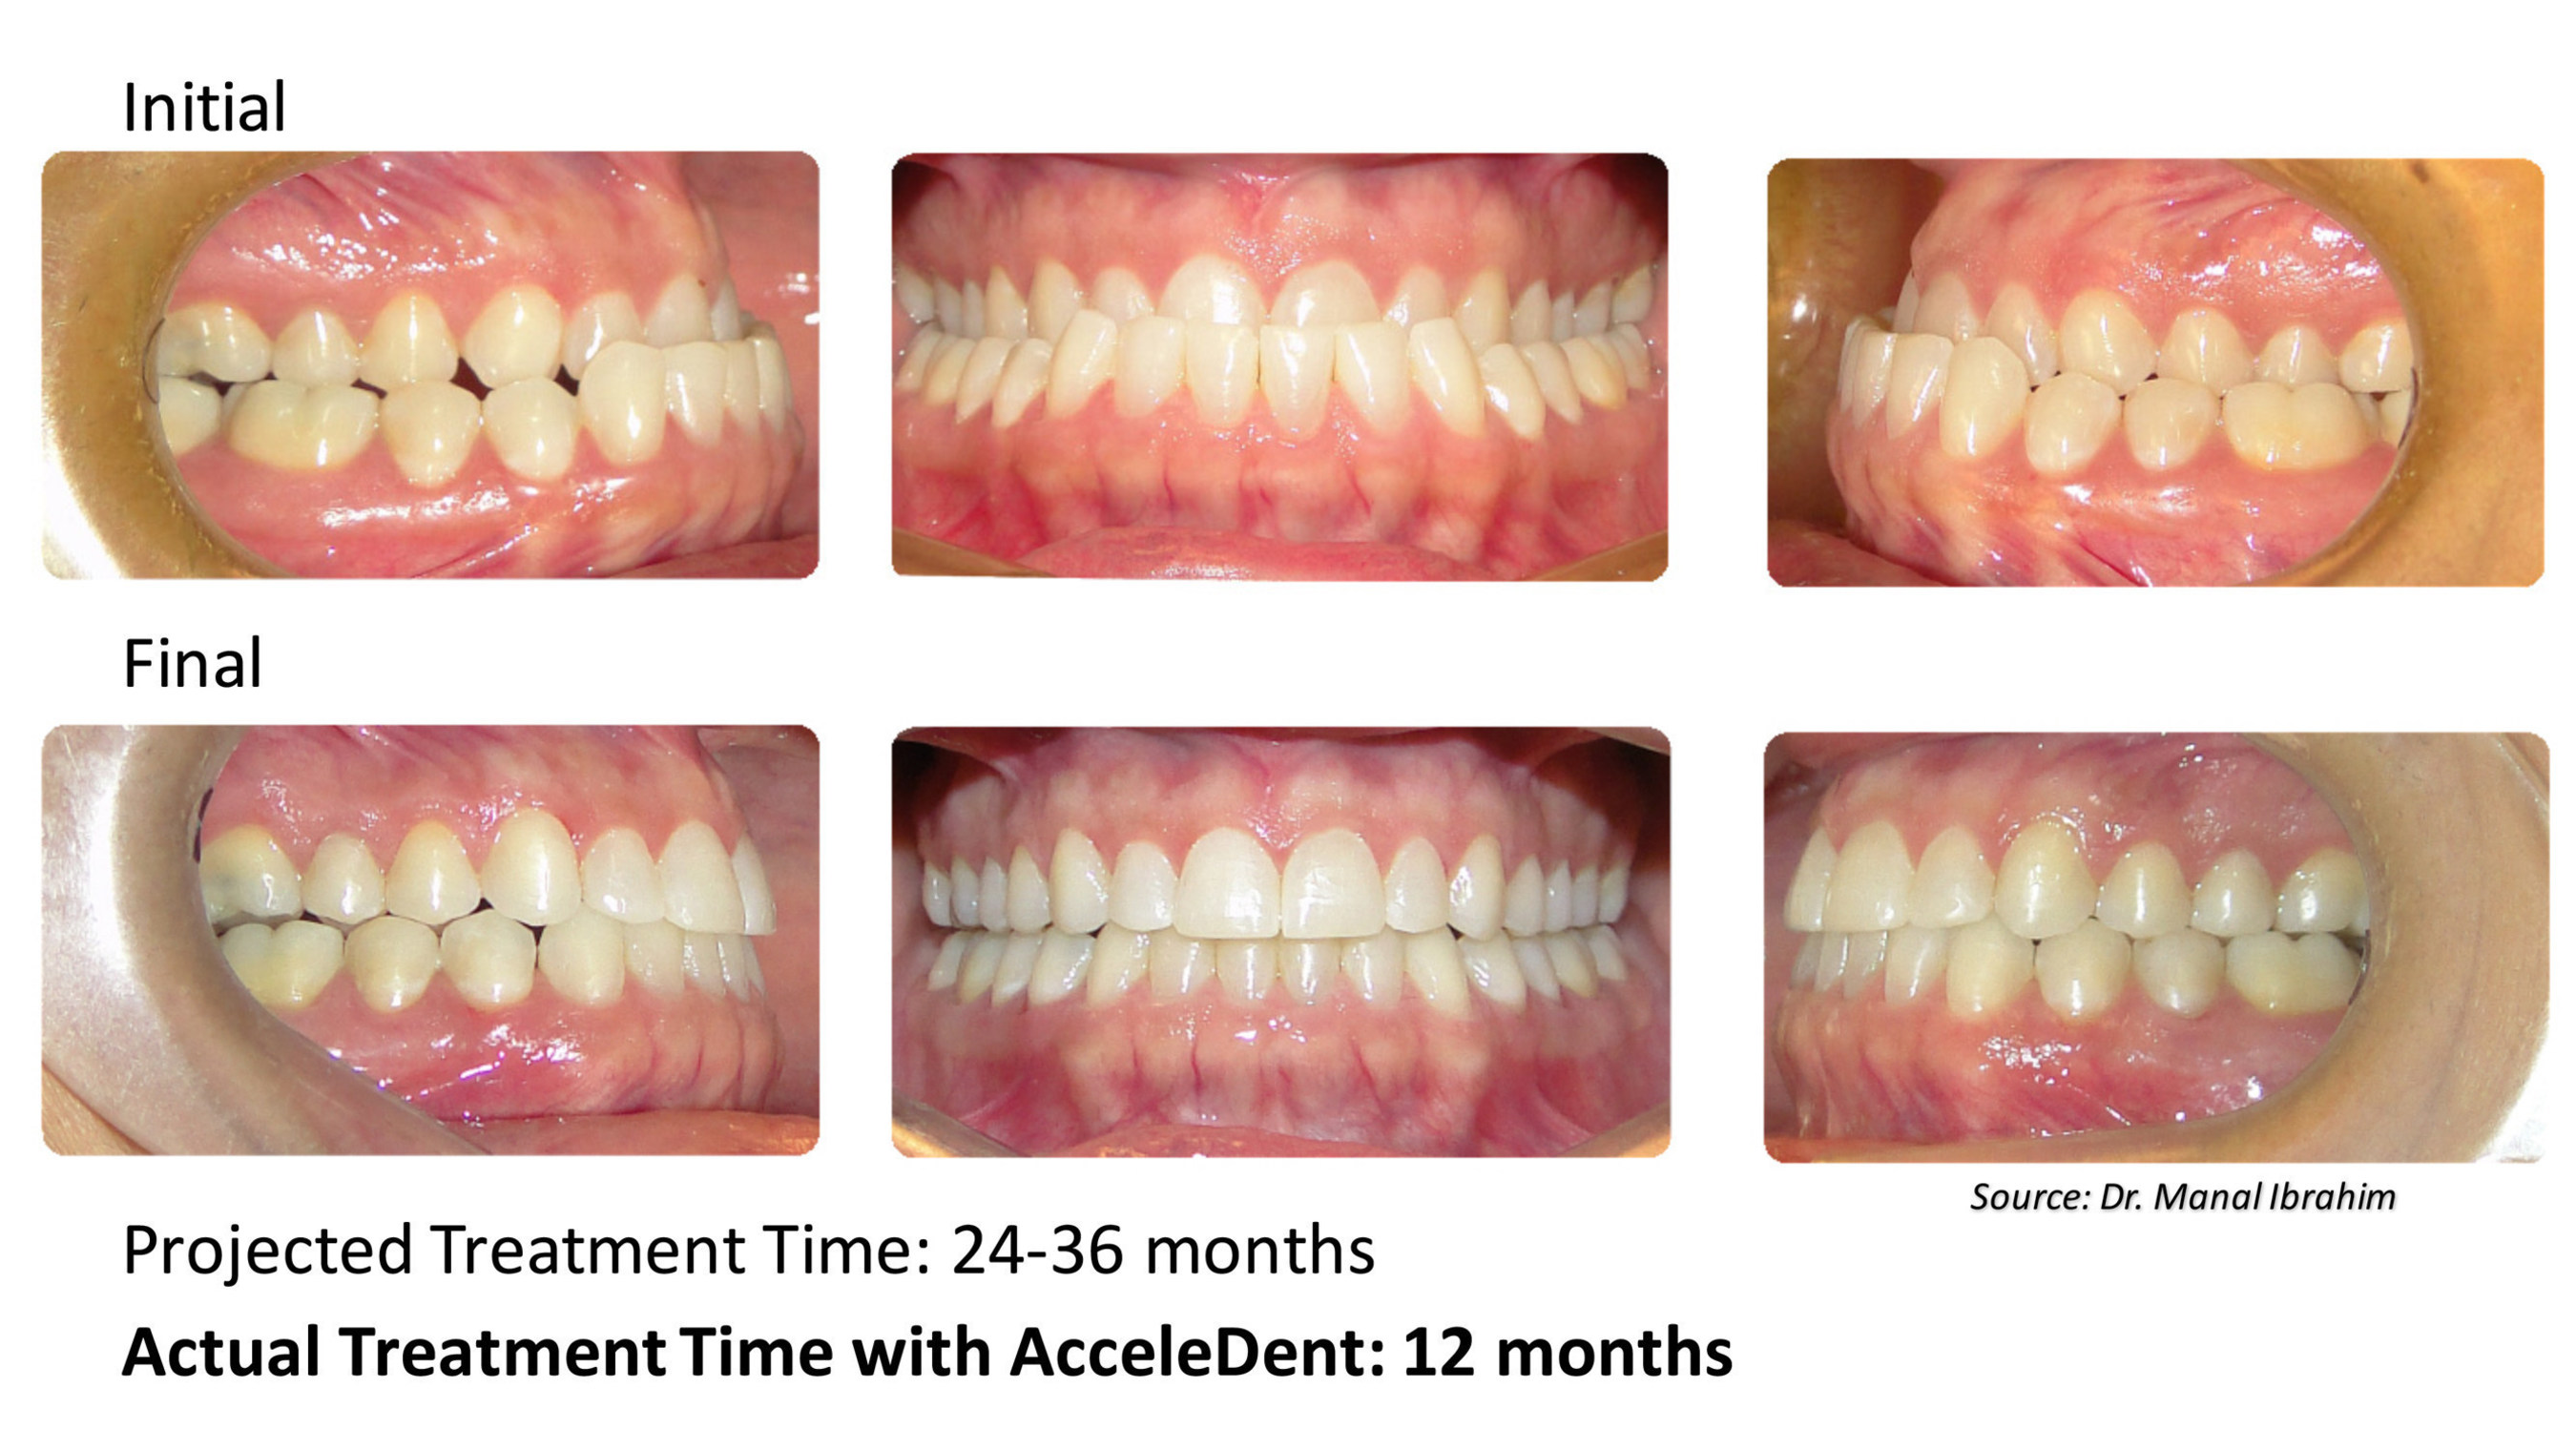 Dr. Manal Ibrahim of Innovative Orthodontic Centers in Naperville, Illinois, accelerated the treatment of this 43-year-old female patient with AcceleDent, the first and only FDA-cleared vibratory device that has been clinically proven to speed up braces and aligner treatment by as much as 50 percent and reduce the discomfort associated with orthodontic treatment. The patient presented as a class III with complete anterior crossbite and bilateral posterior crossbite. She completed accelerated orthodontic...